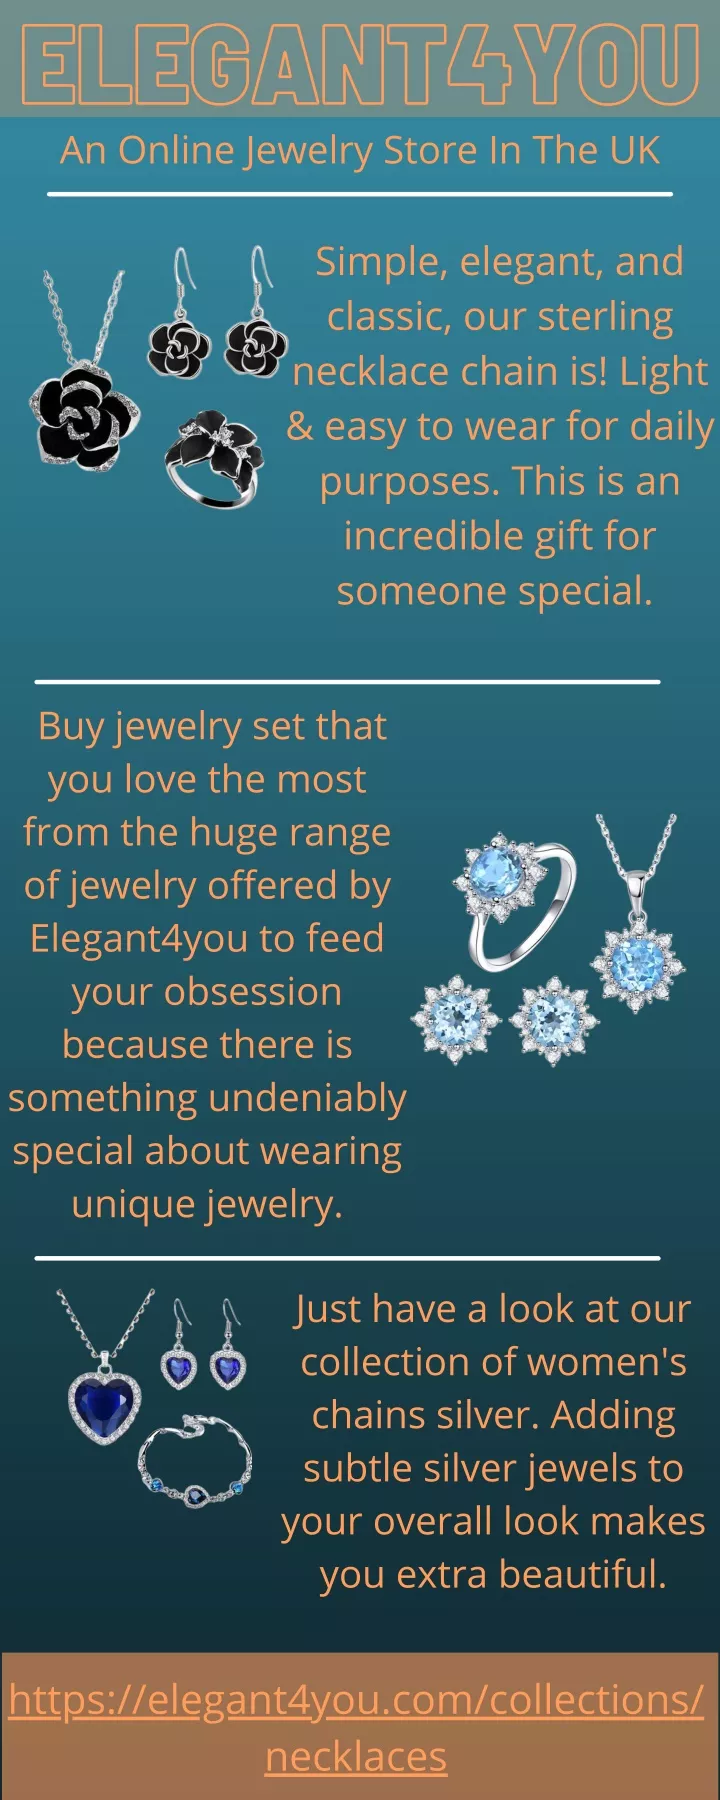 elegant4you an online jewelry store in the uk